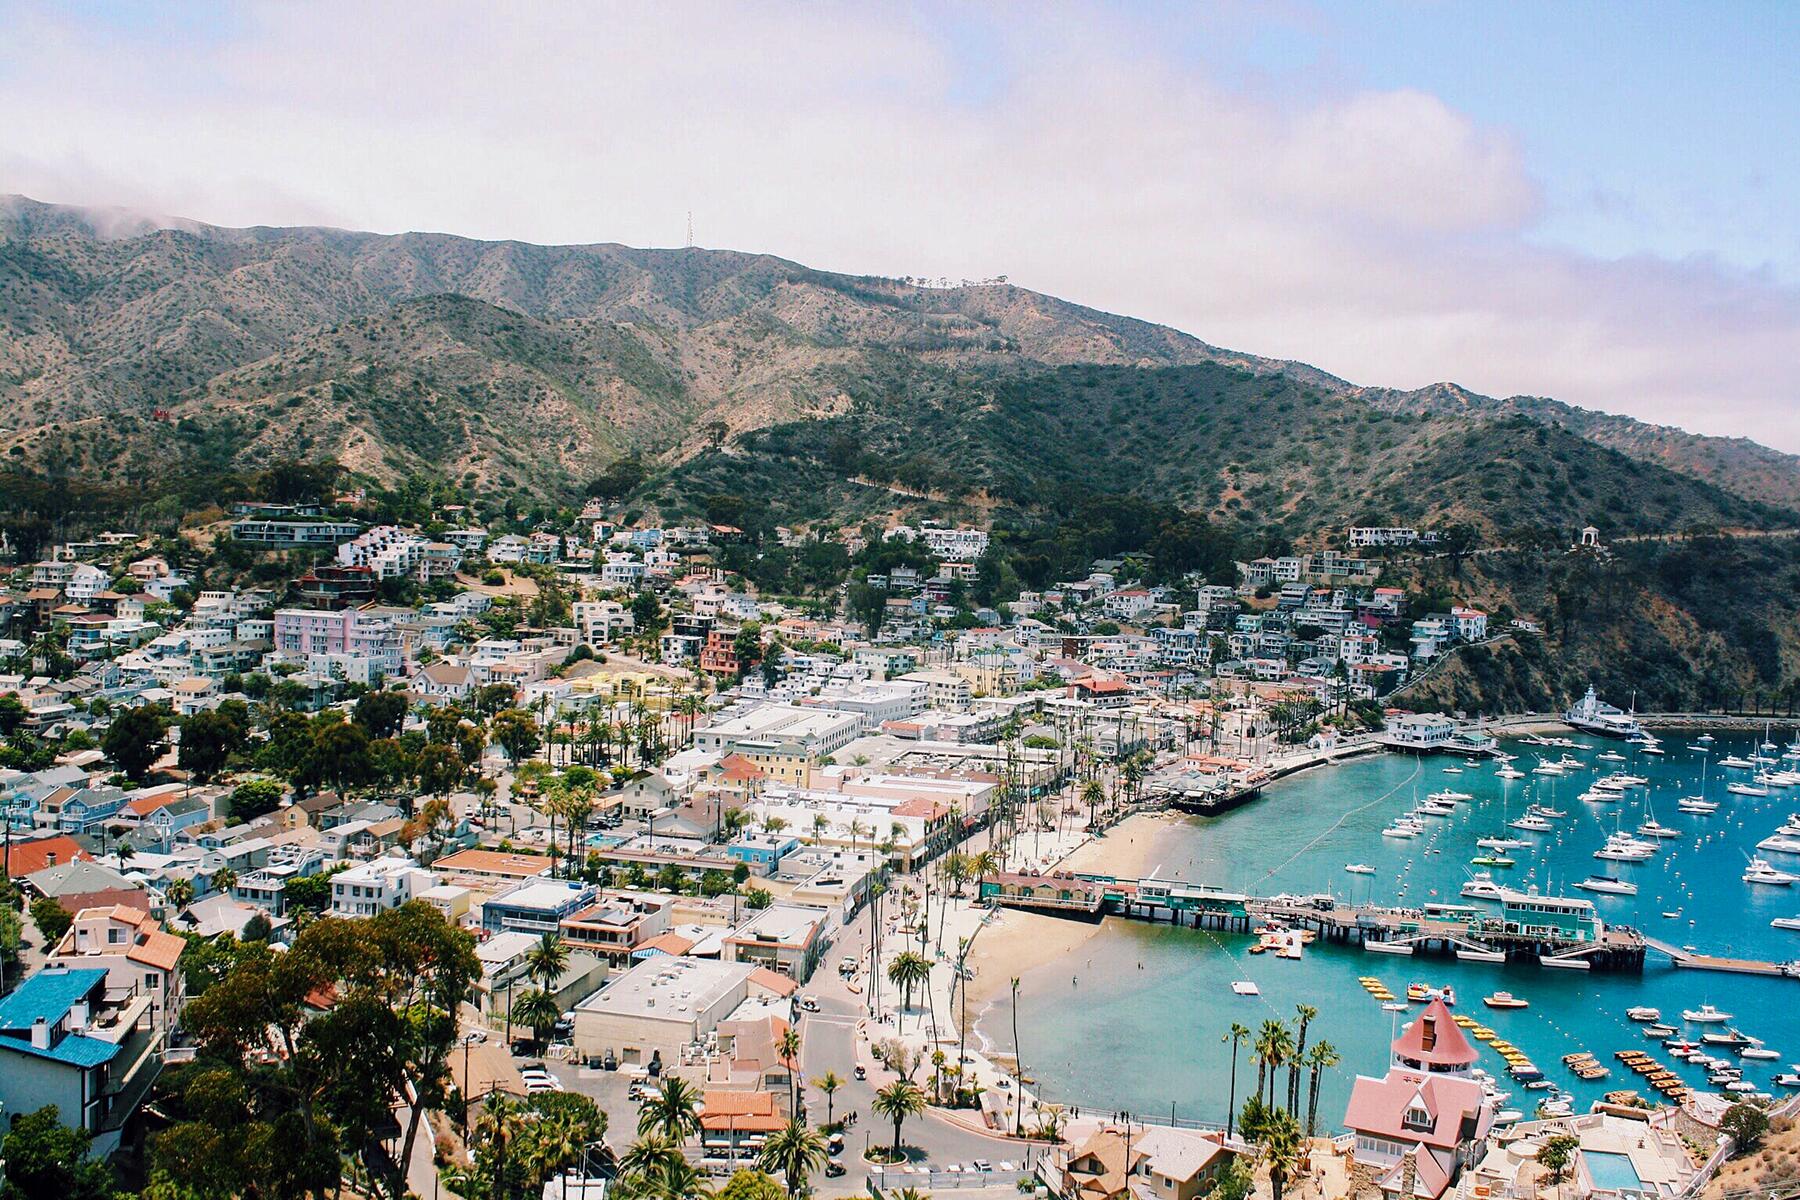 The Perfect 3 Day Weekend Road Trip Itinerary To Santa Catalina Island